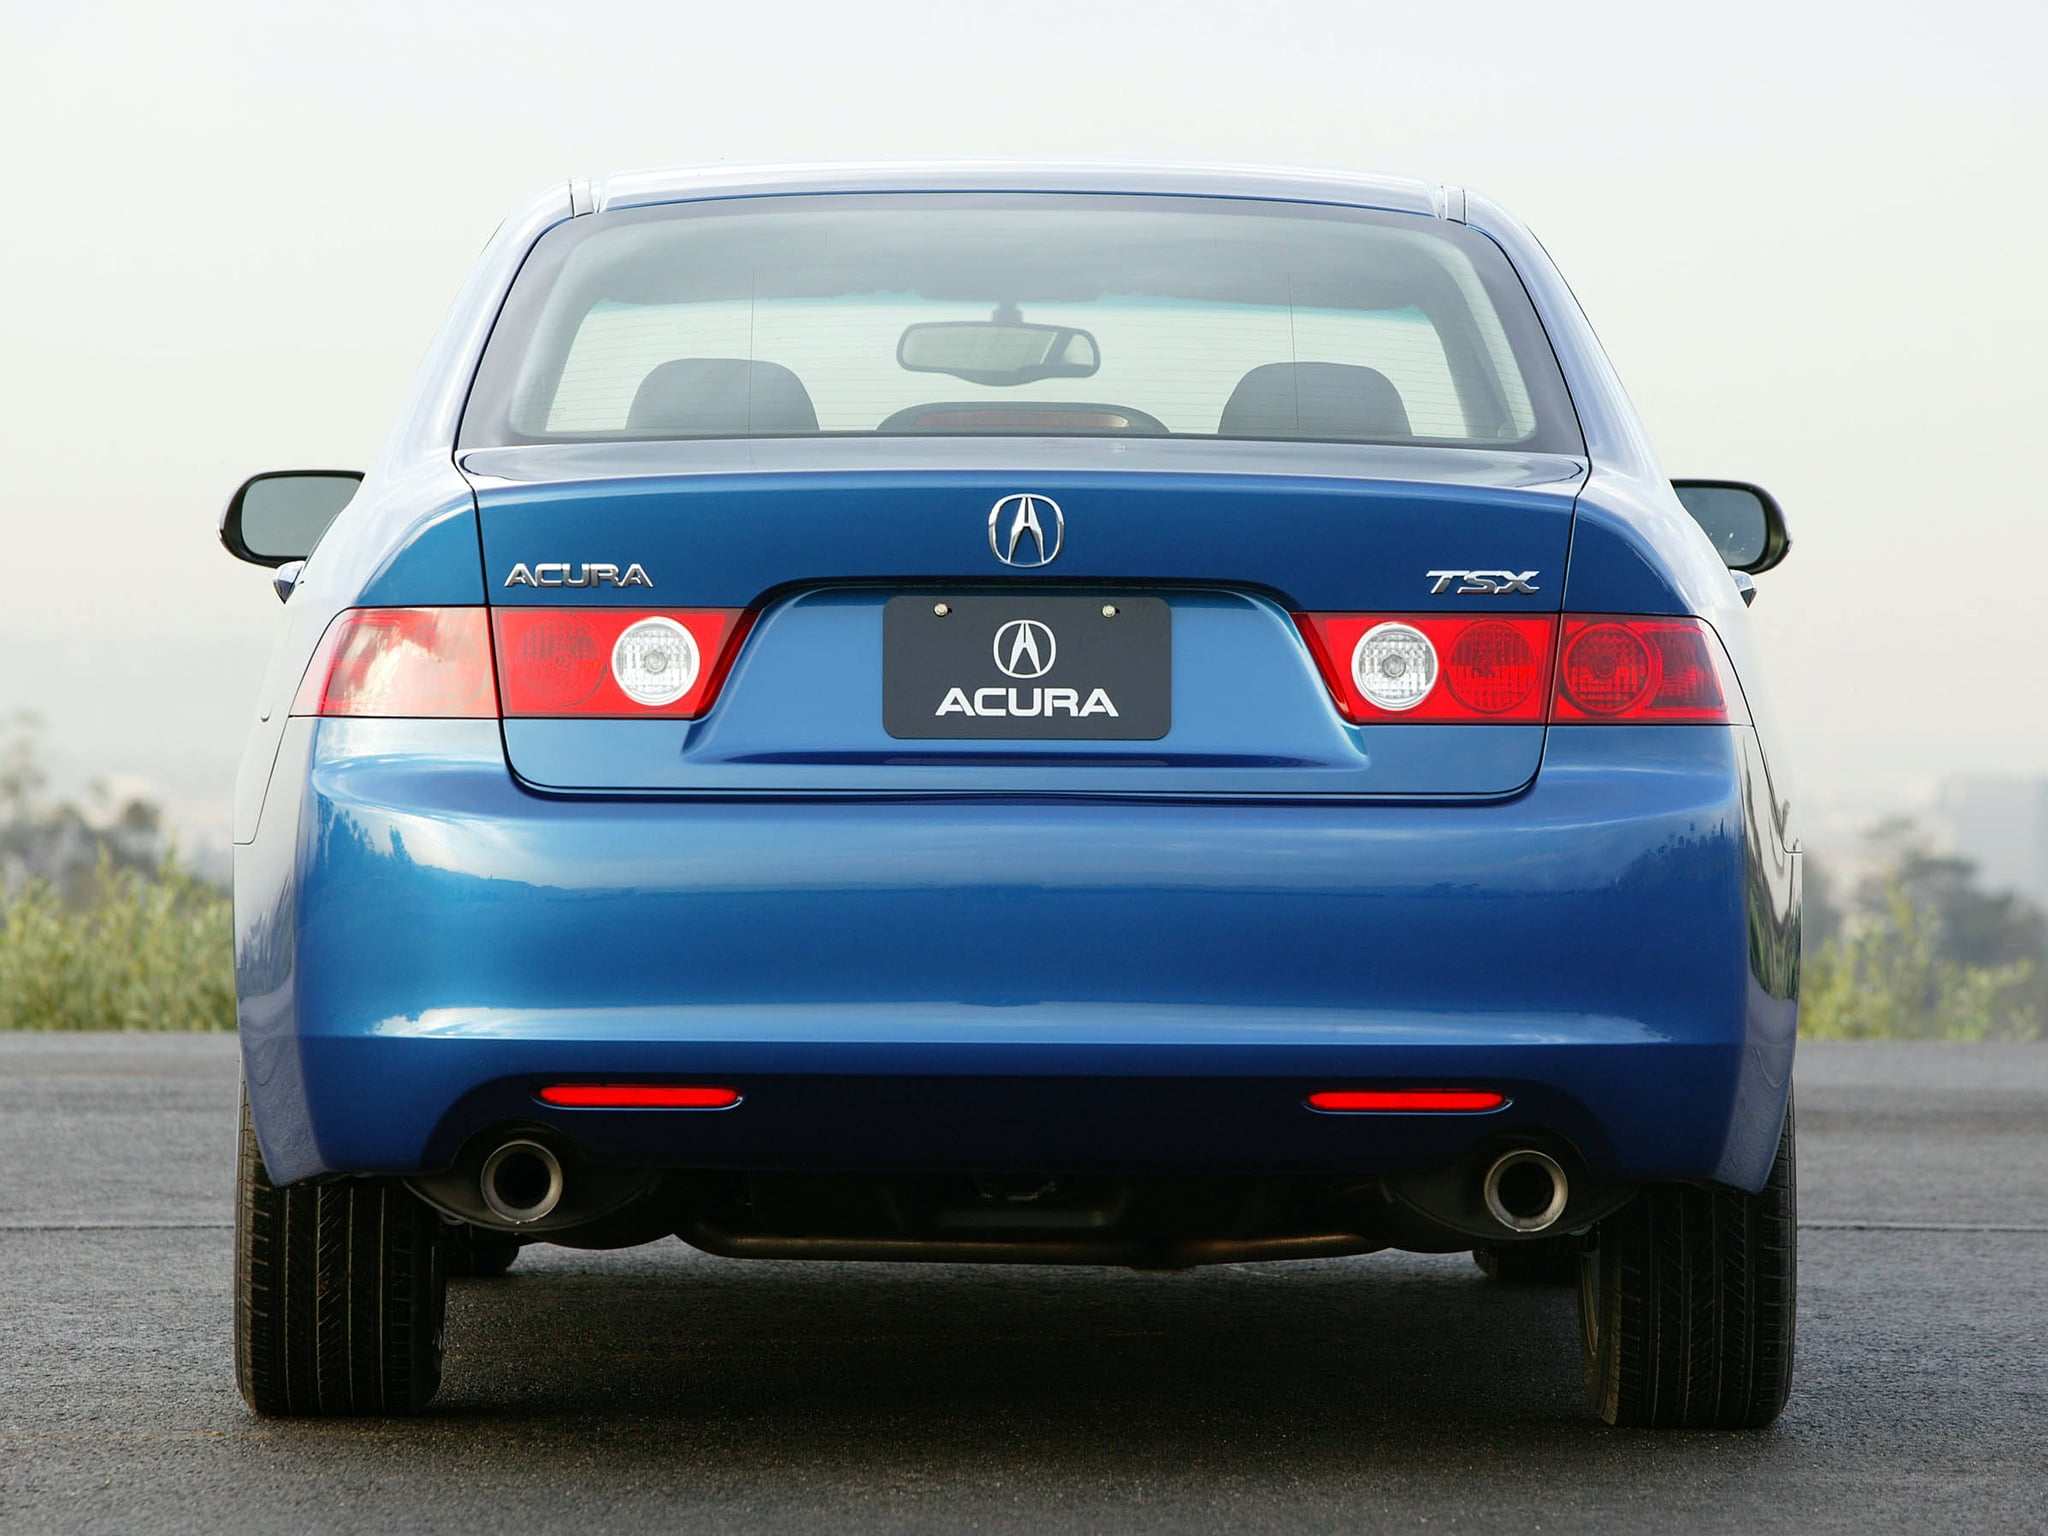 blue Acura TSX, 2003, rear view, style, cars, nature, asphalt